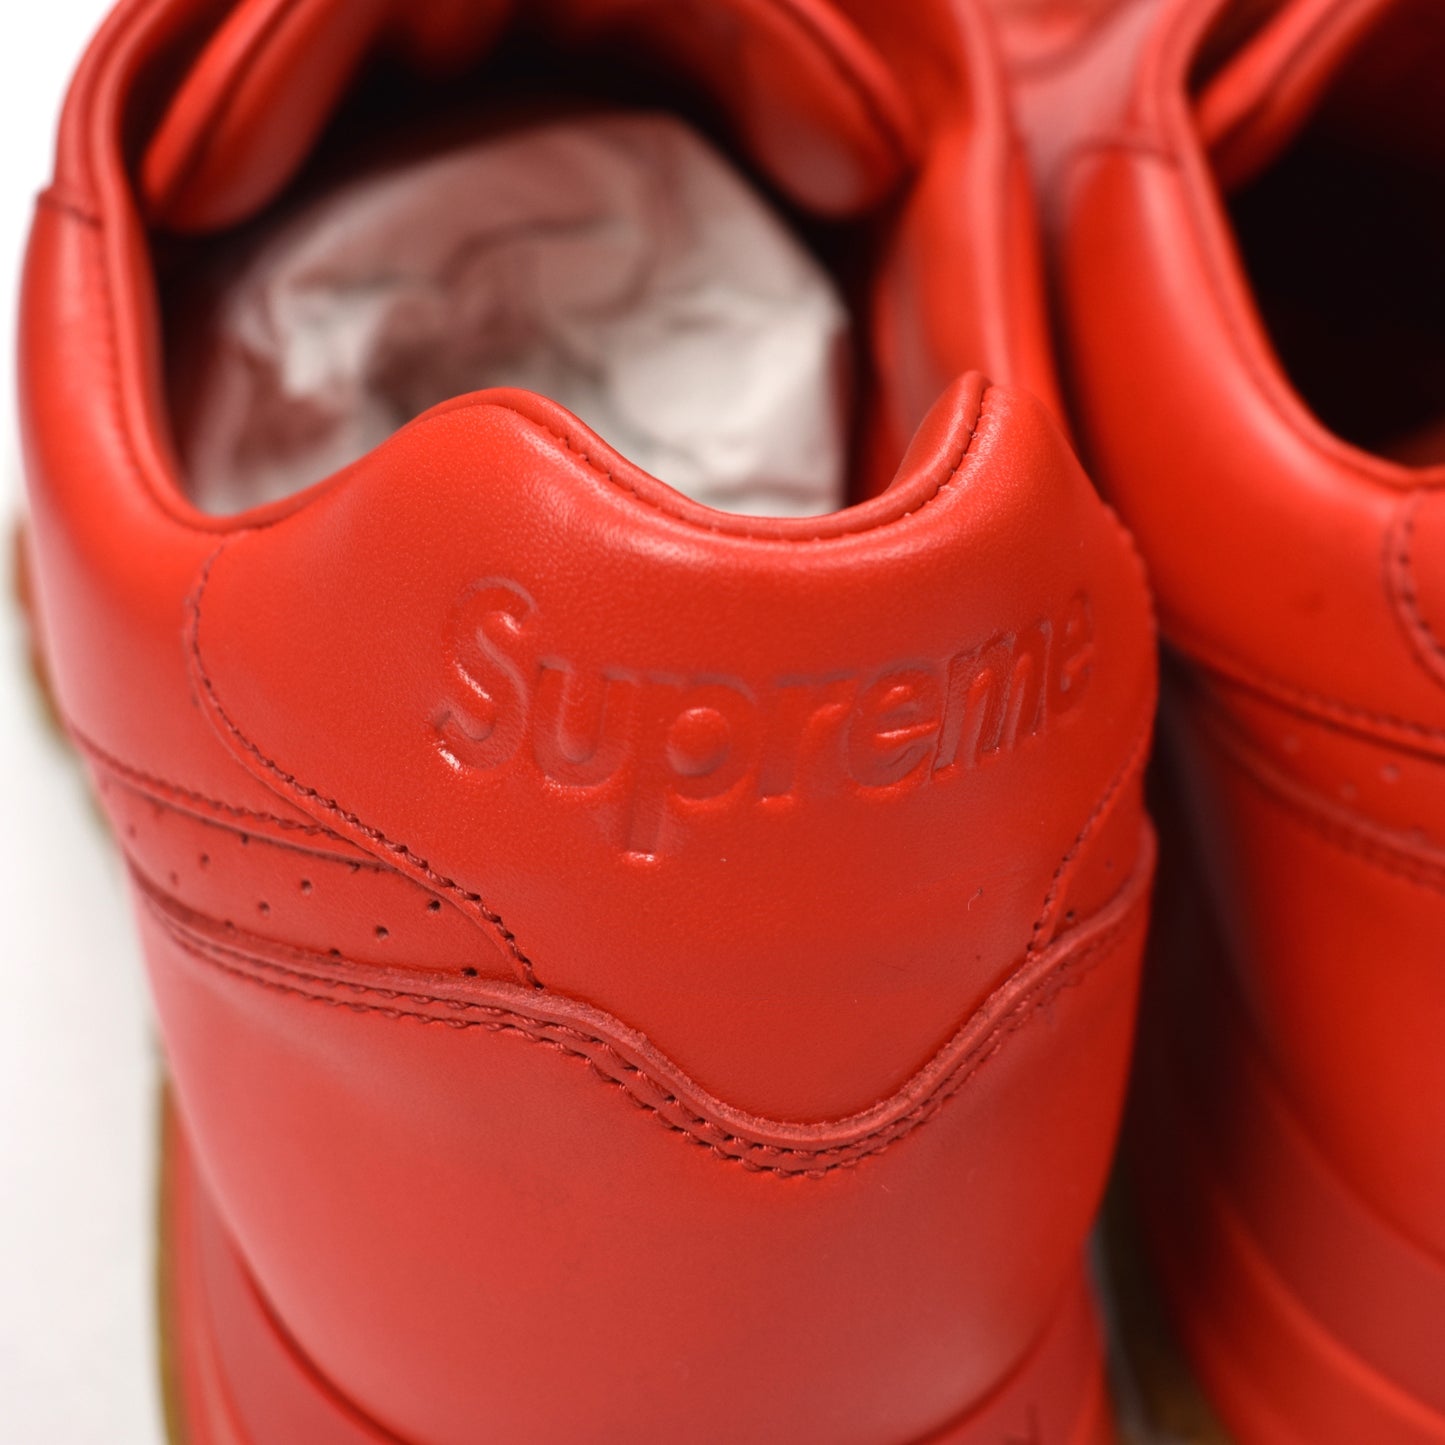 Louis Vuitton x Supreme NY Red Leather Run Away Sneakers Schuhe